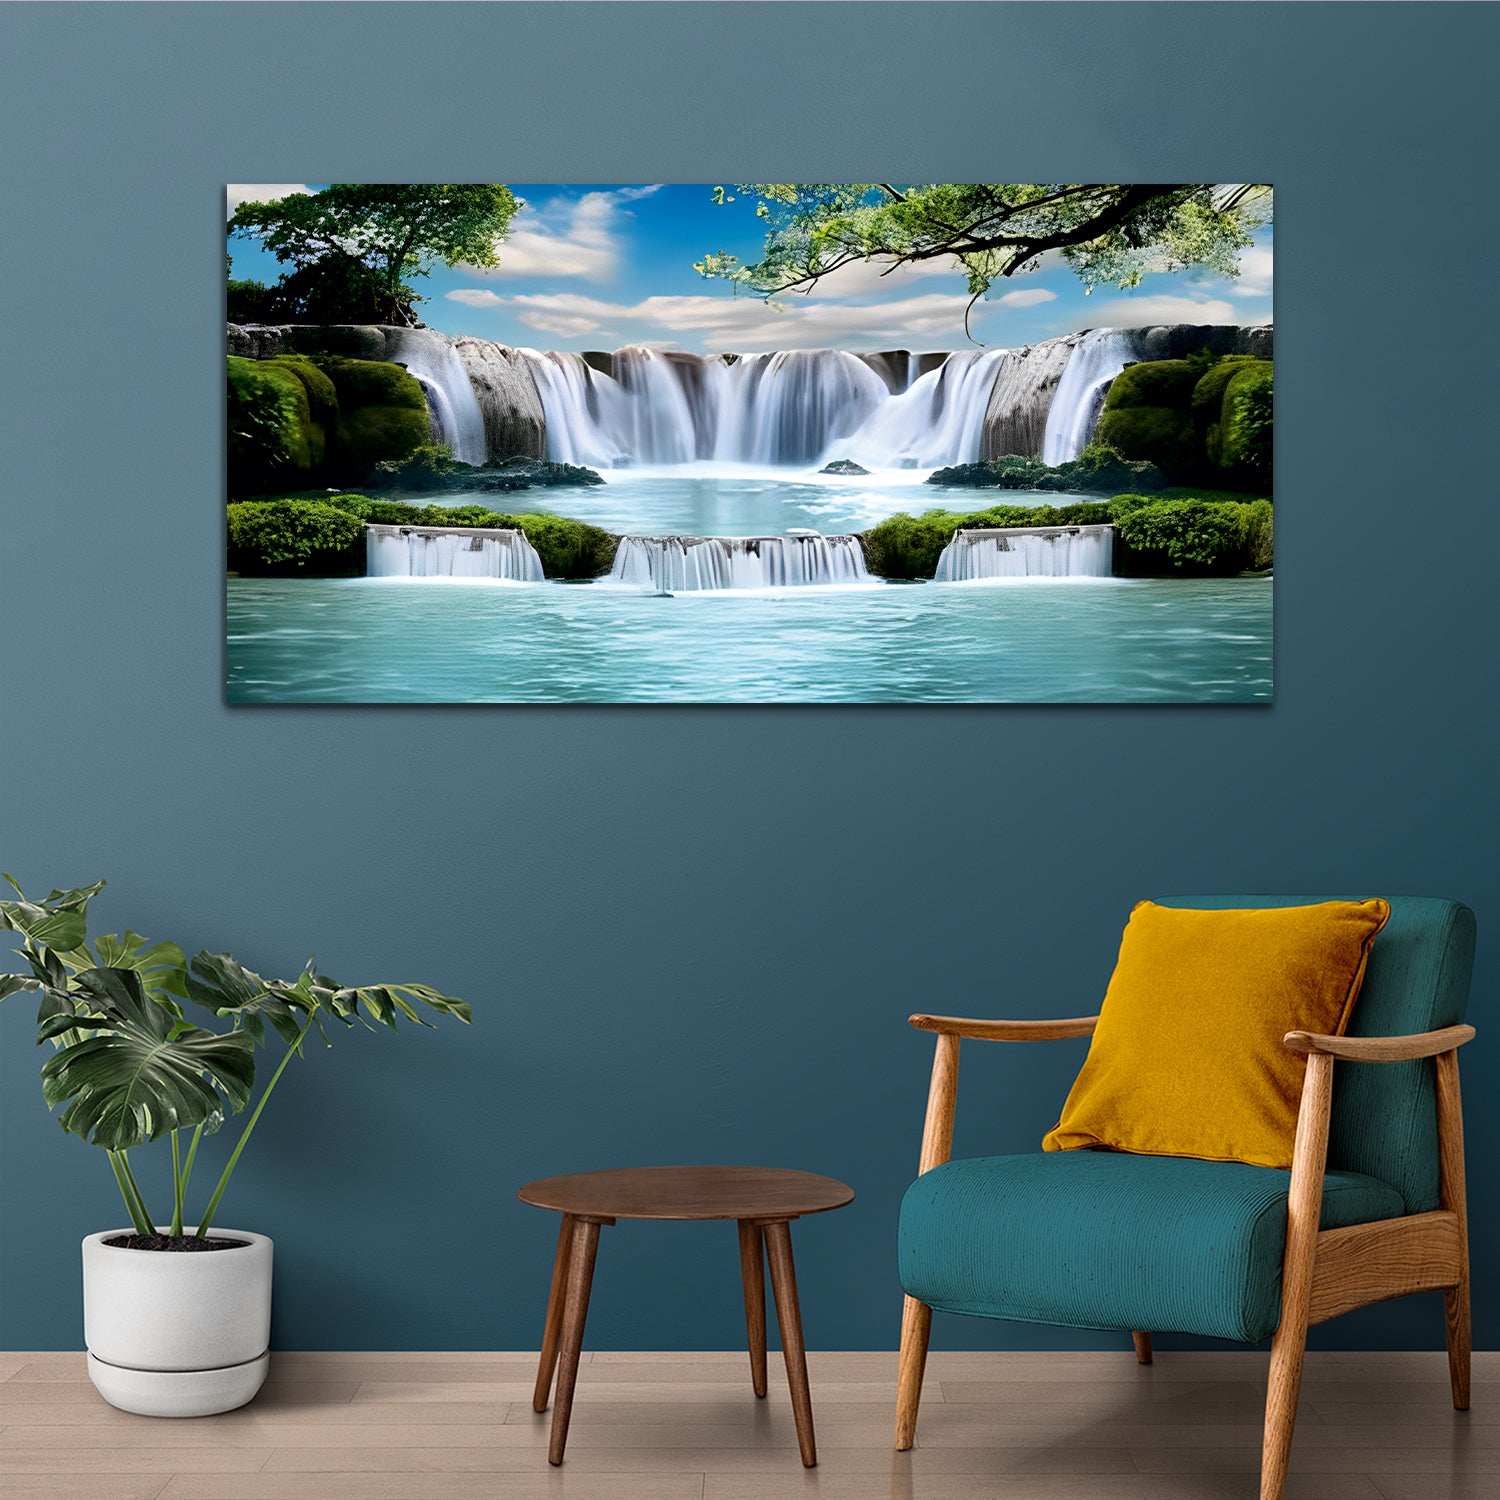 Beautiful Waterfall On Bright Sky canvas wall painting